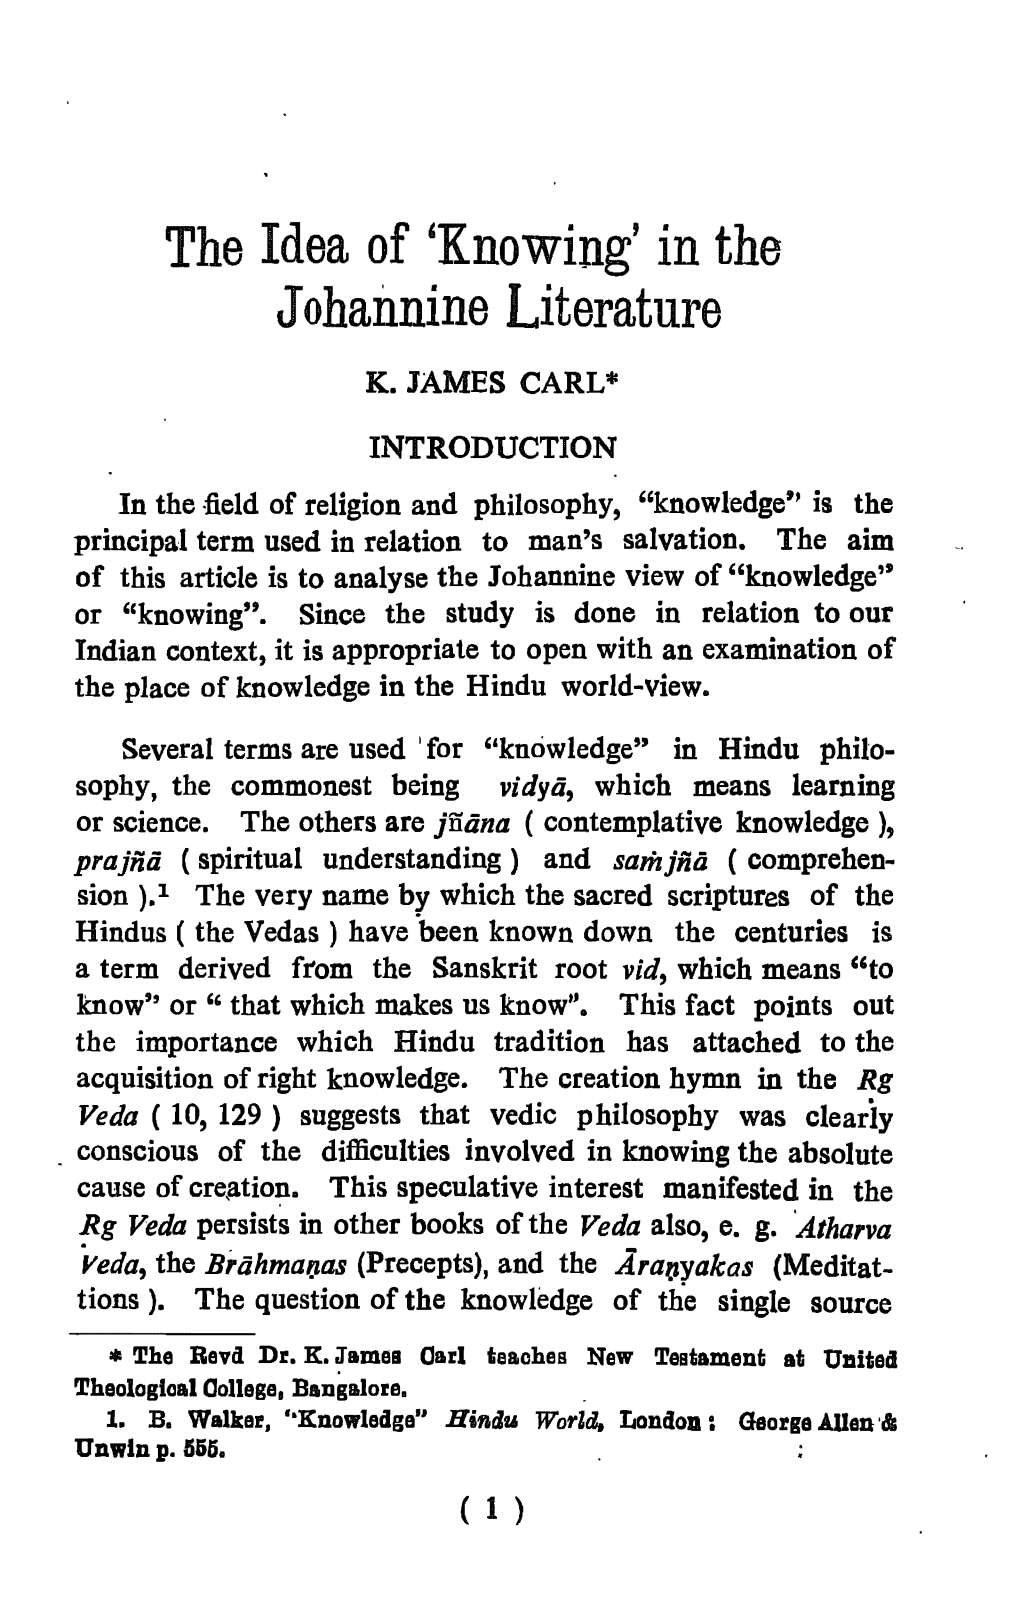 Knowing" in the Johannine Literature,"